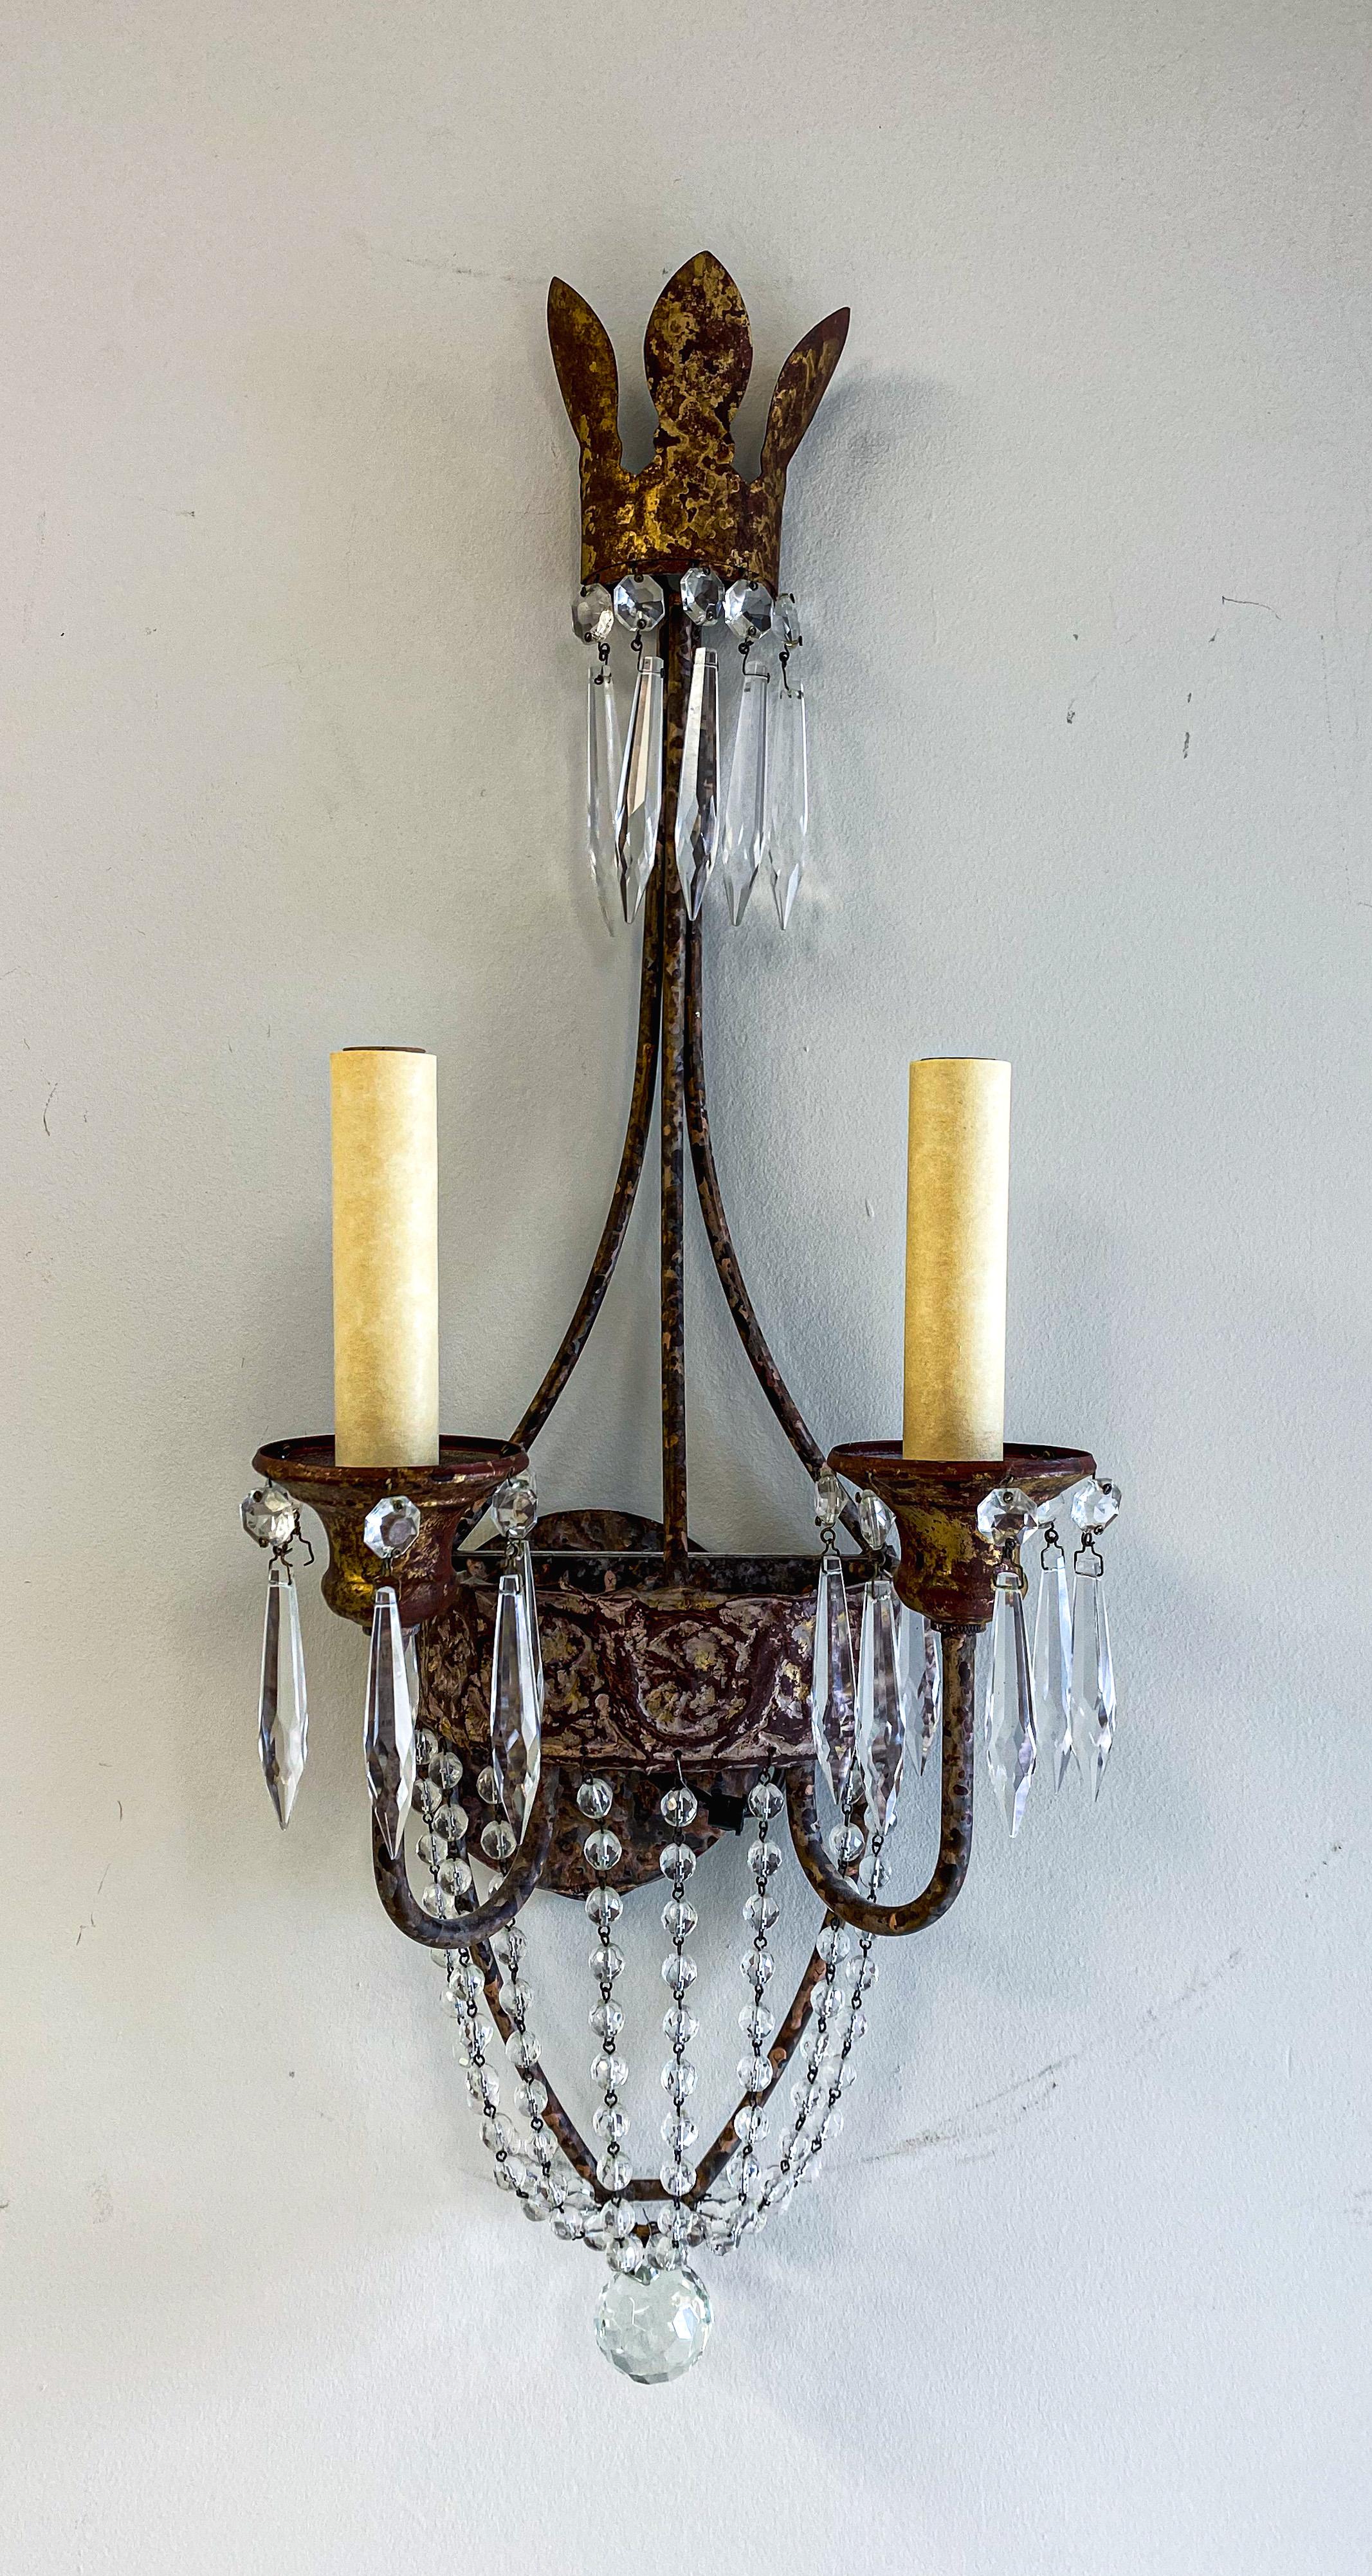 An exquisite pair of Niermann Weeks Italian style Neapolitan sconces. Each sconce features a leaf crown-designed top and embellished with beaded swags and two tiers of crystal prisms terminating in a faceted crystal ball.  The quality sconces are